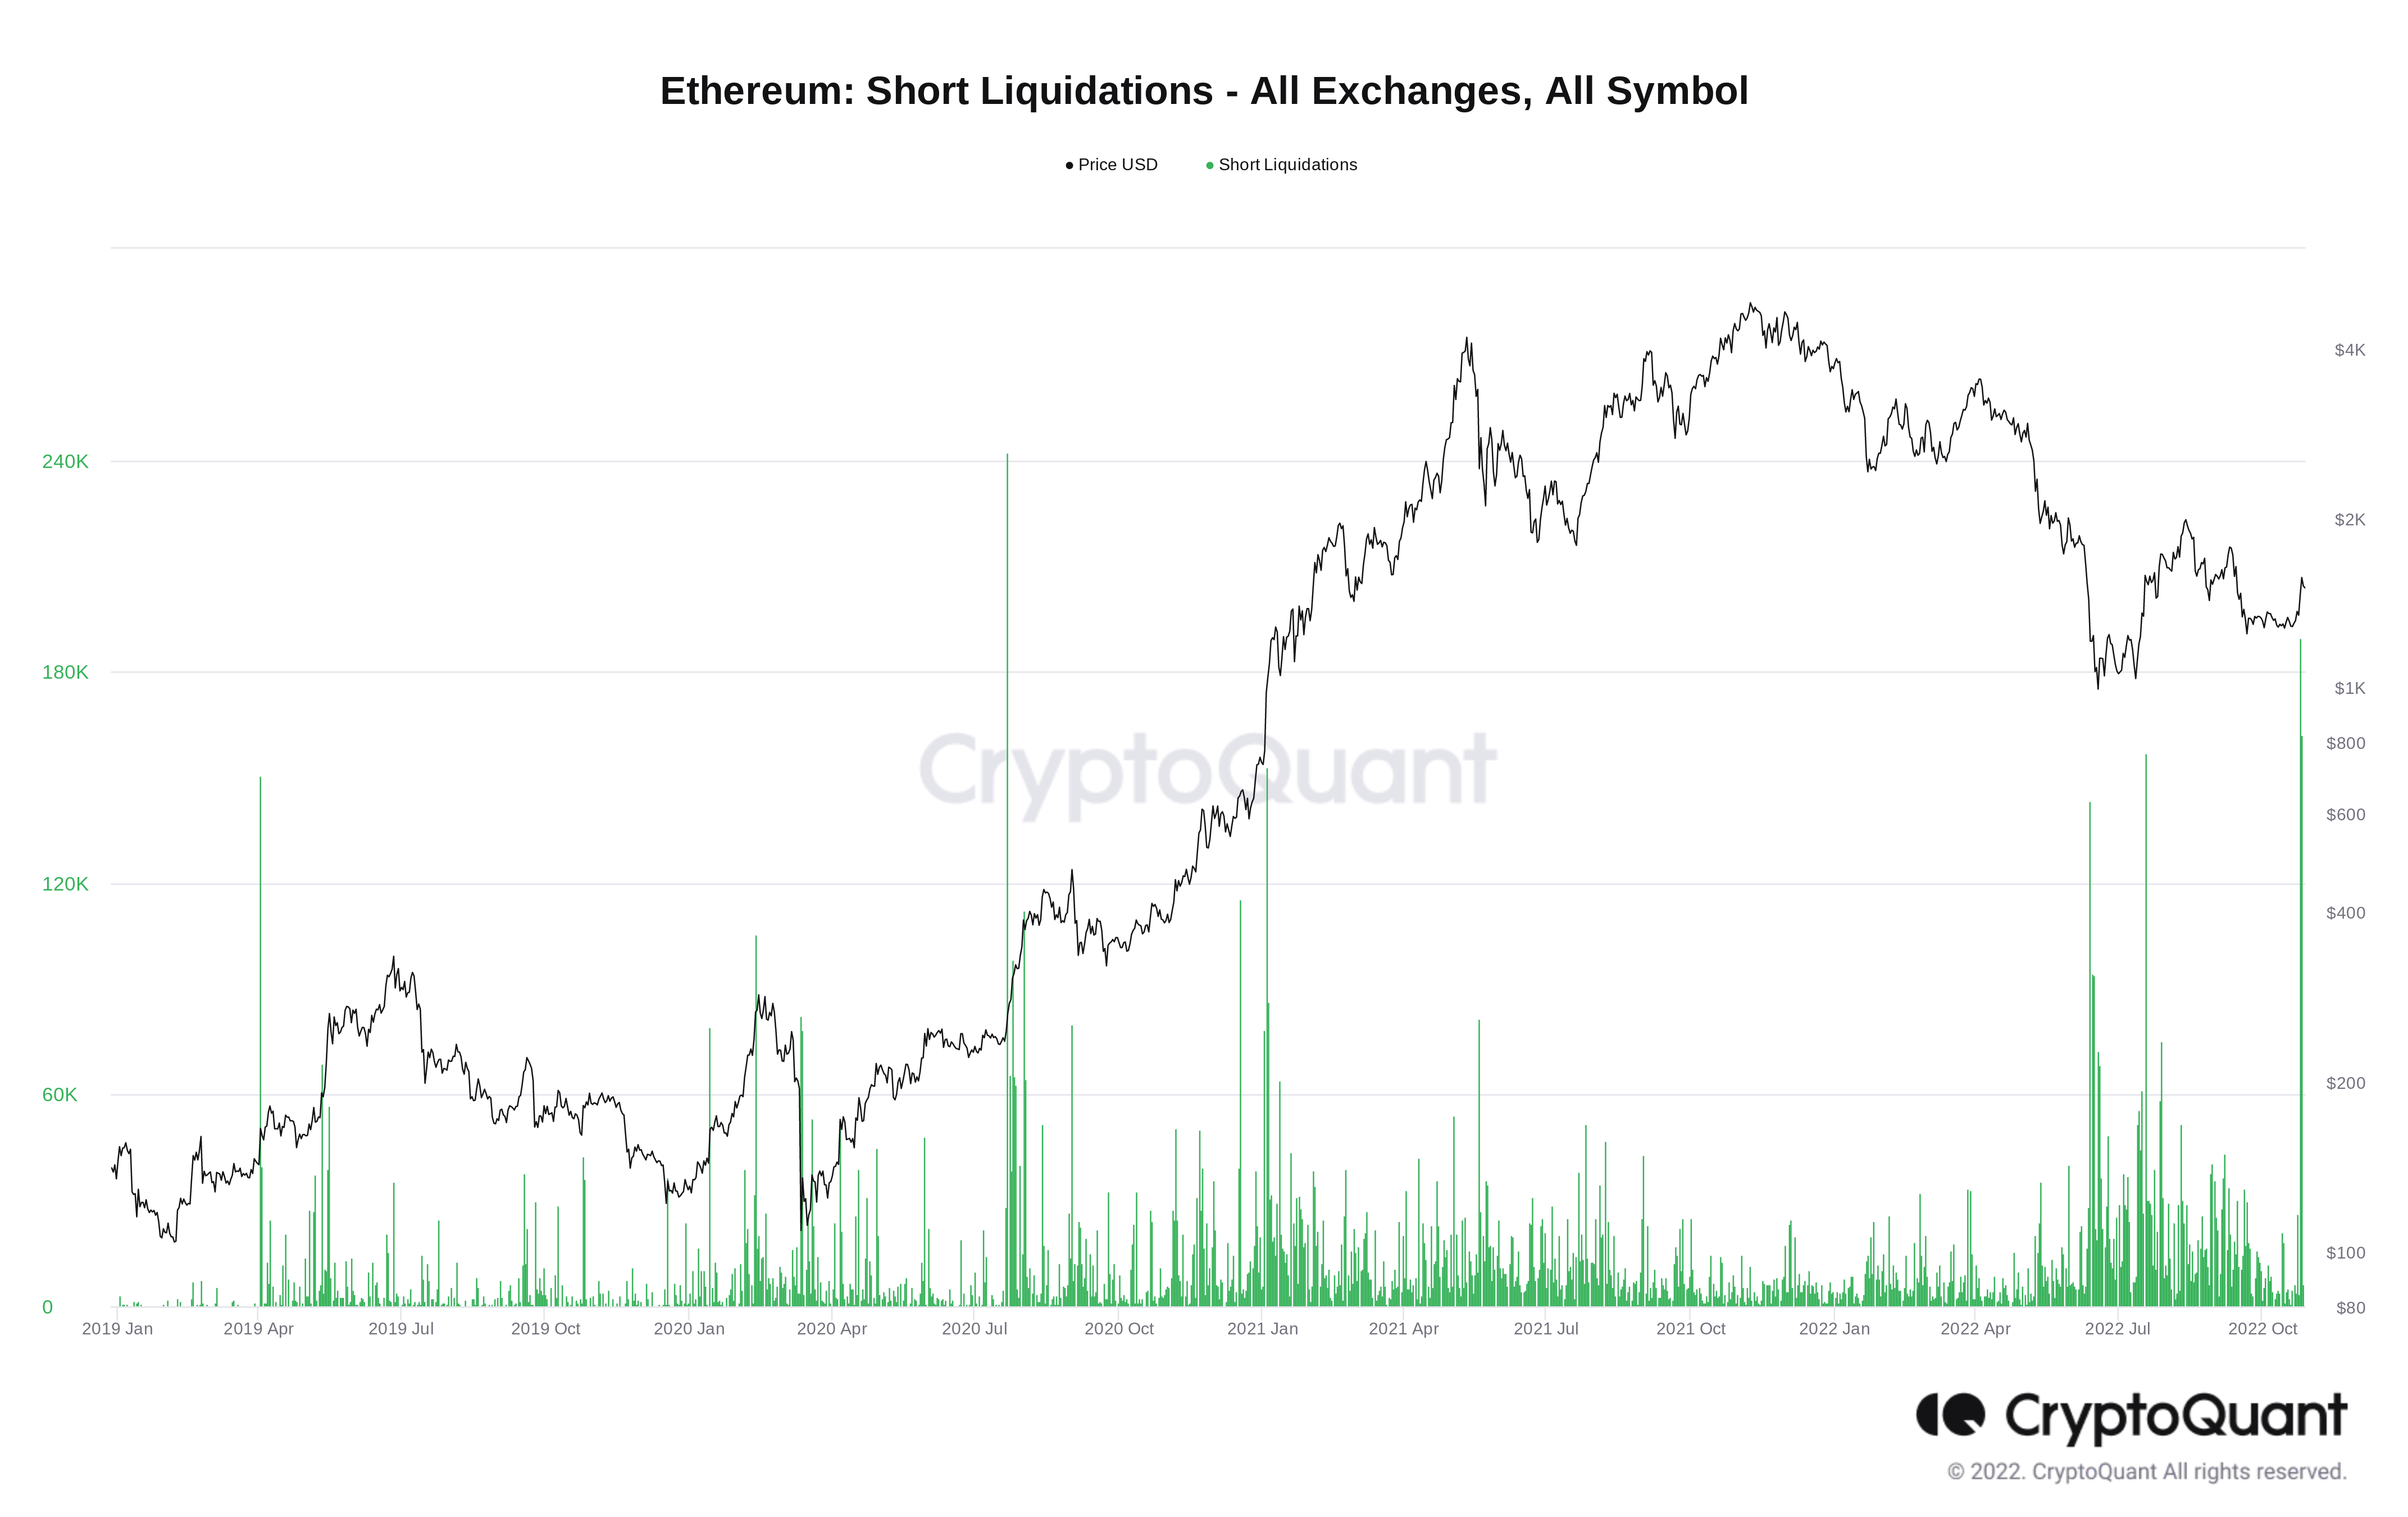 1667196005 935 Ethereum sets record ETH short liquidations wiping out 500 million